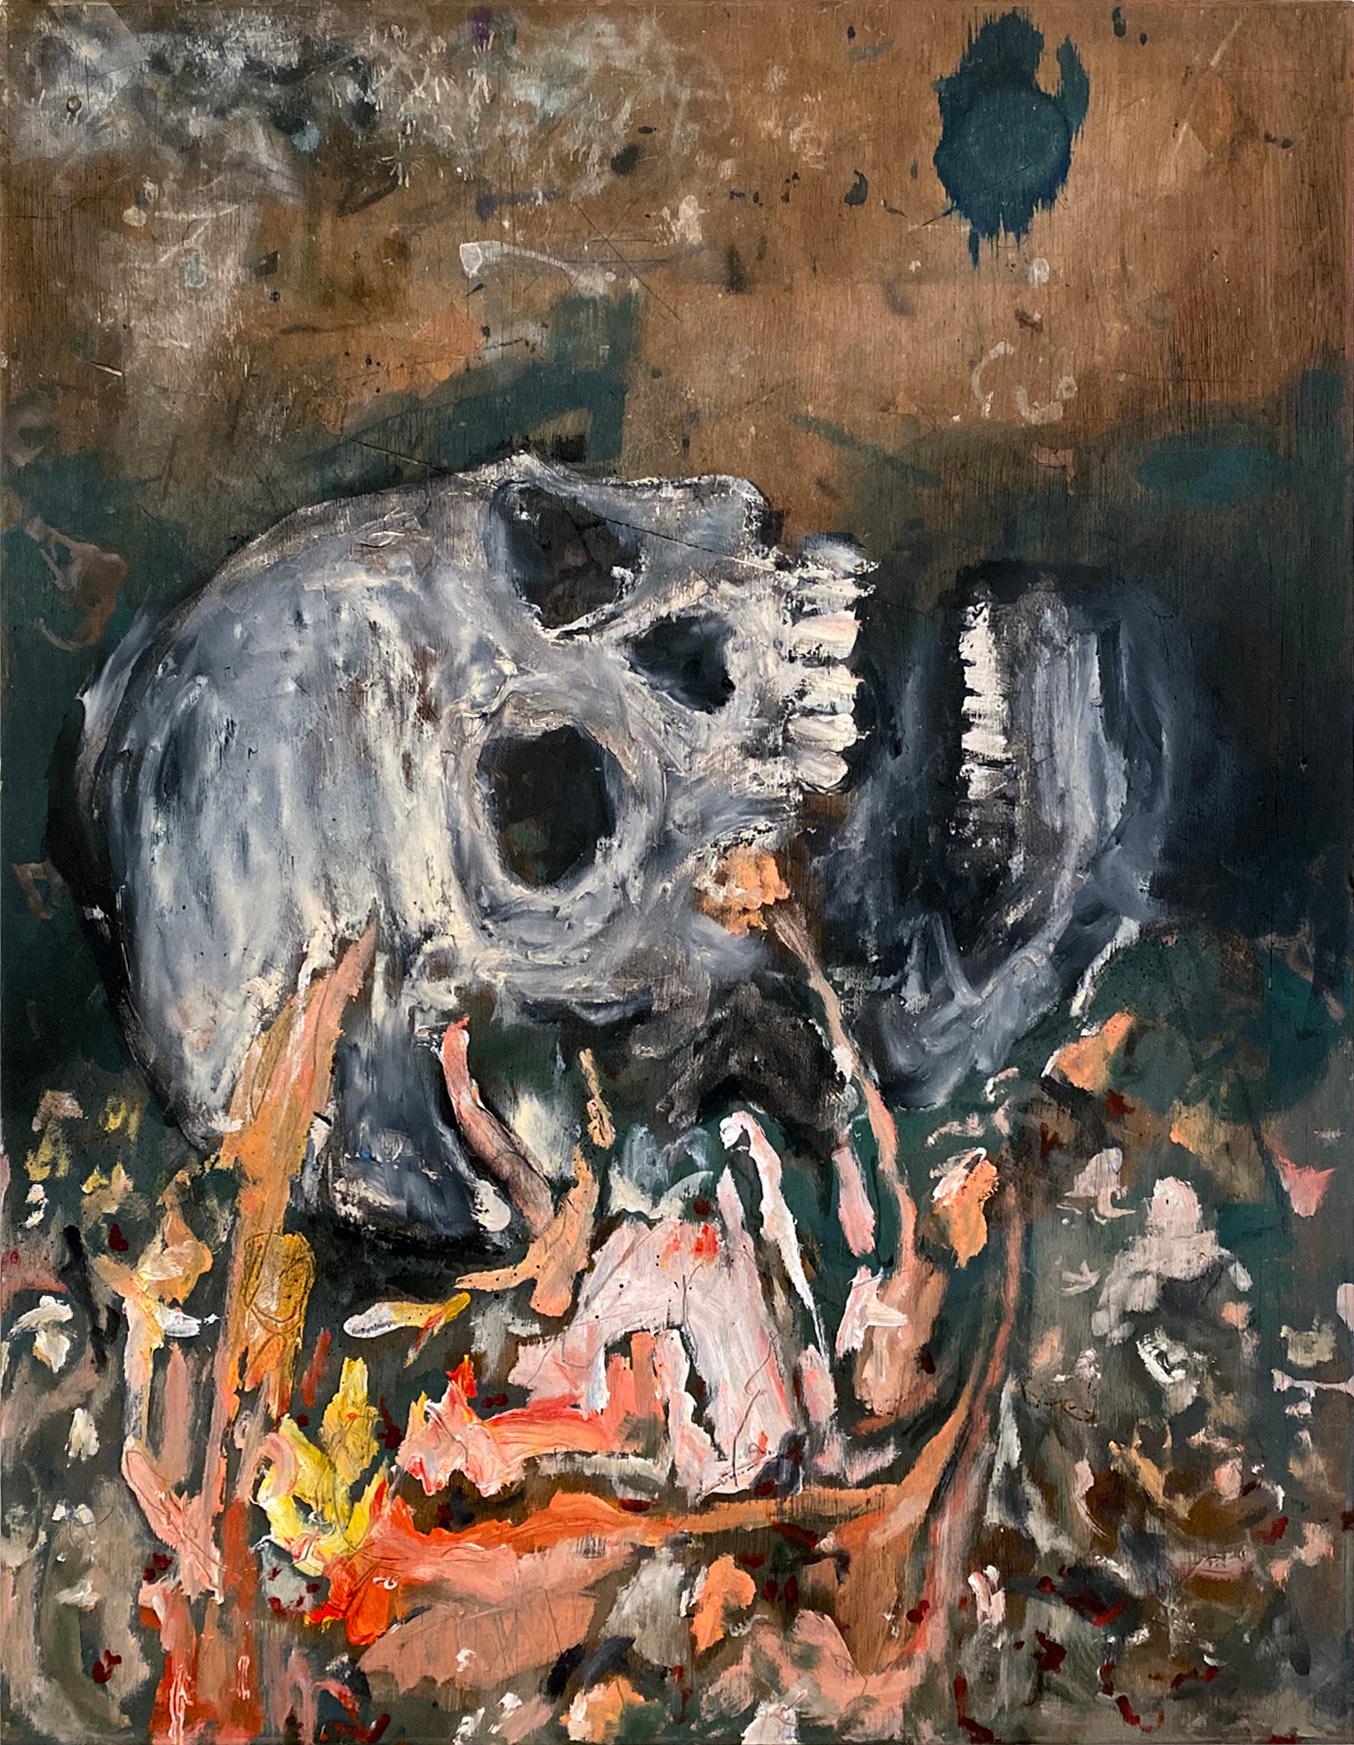 Nicholas Evans Abstract Painting - "Auspice" (Abstract, Colorful, Textured Skull Painting on Antique Wood, 65x50cm)